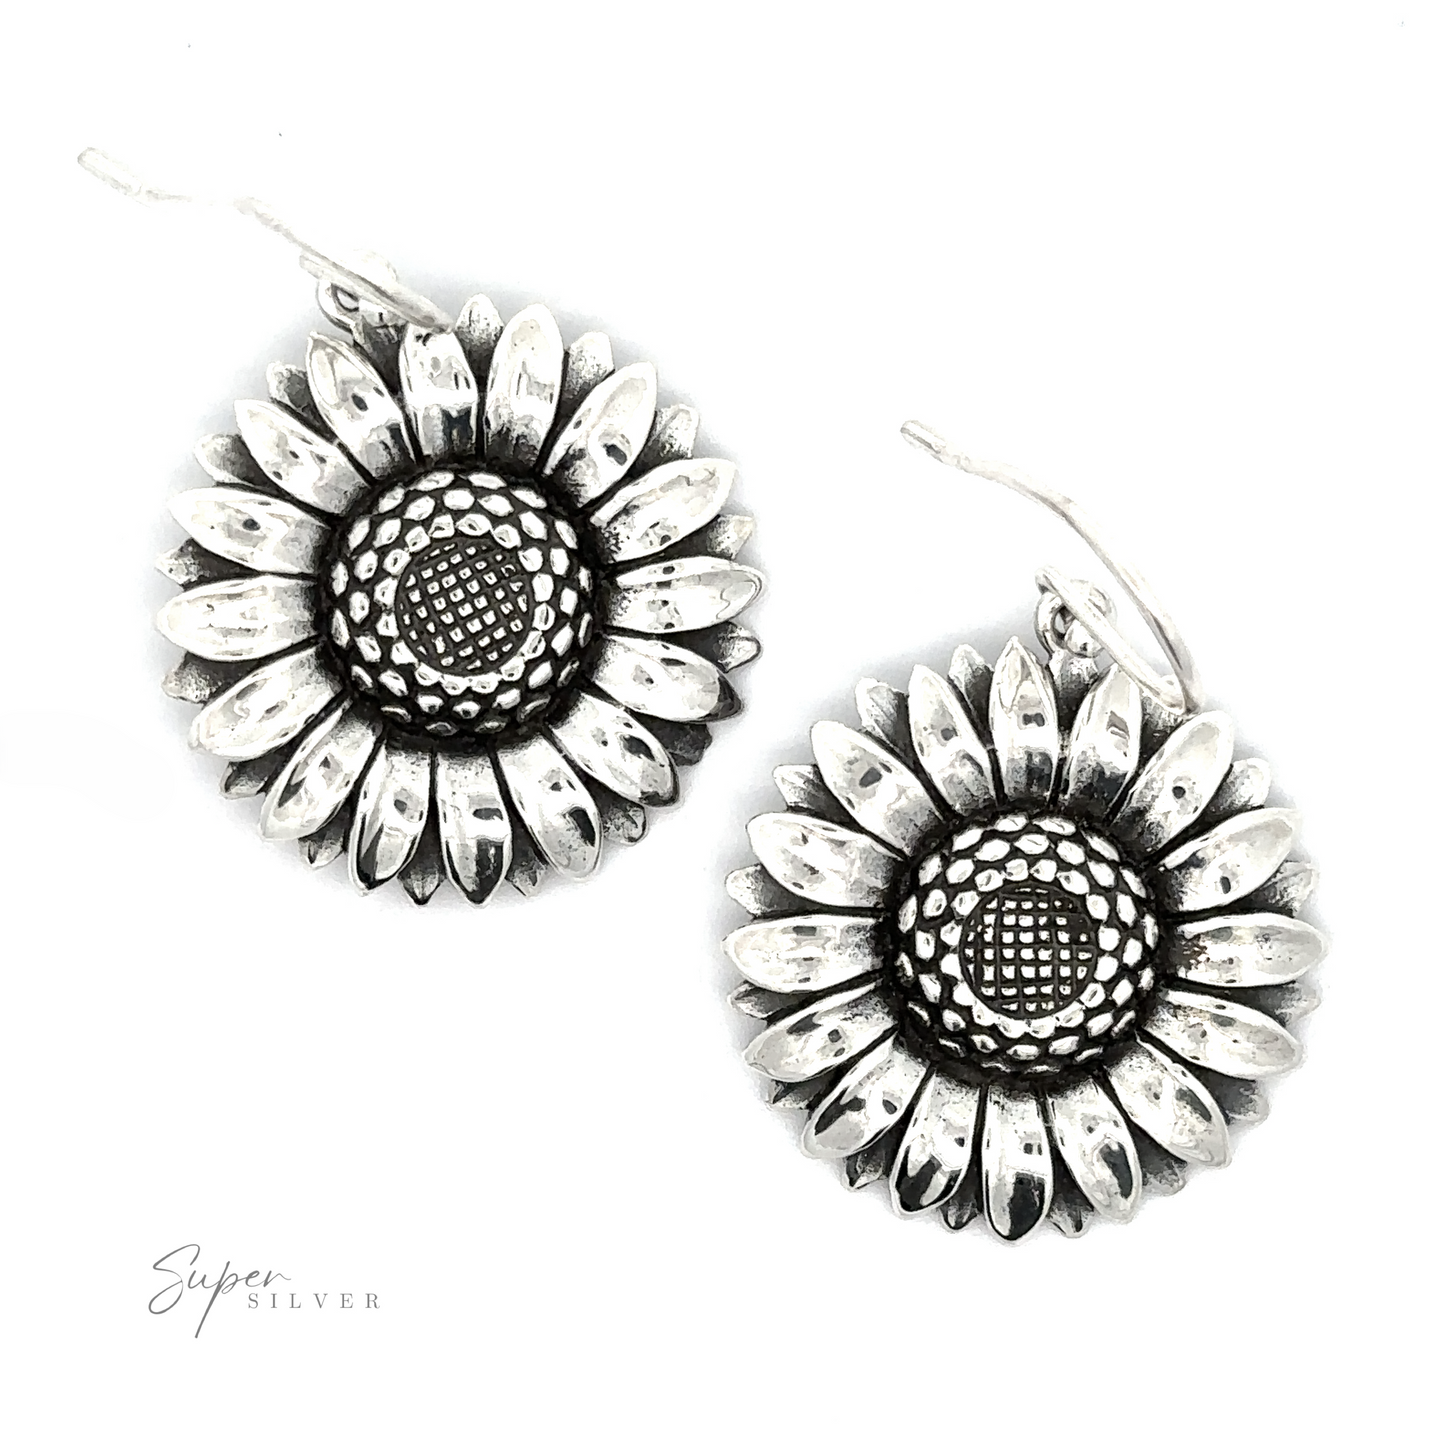 A pair of Silver Sunflower Earrings with detailed petal designs and textured centers, isolated on a white background.